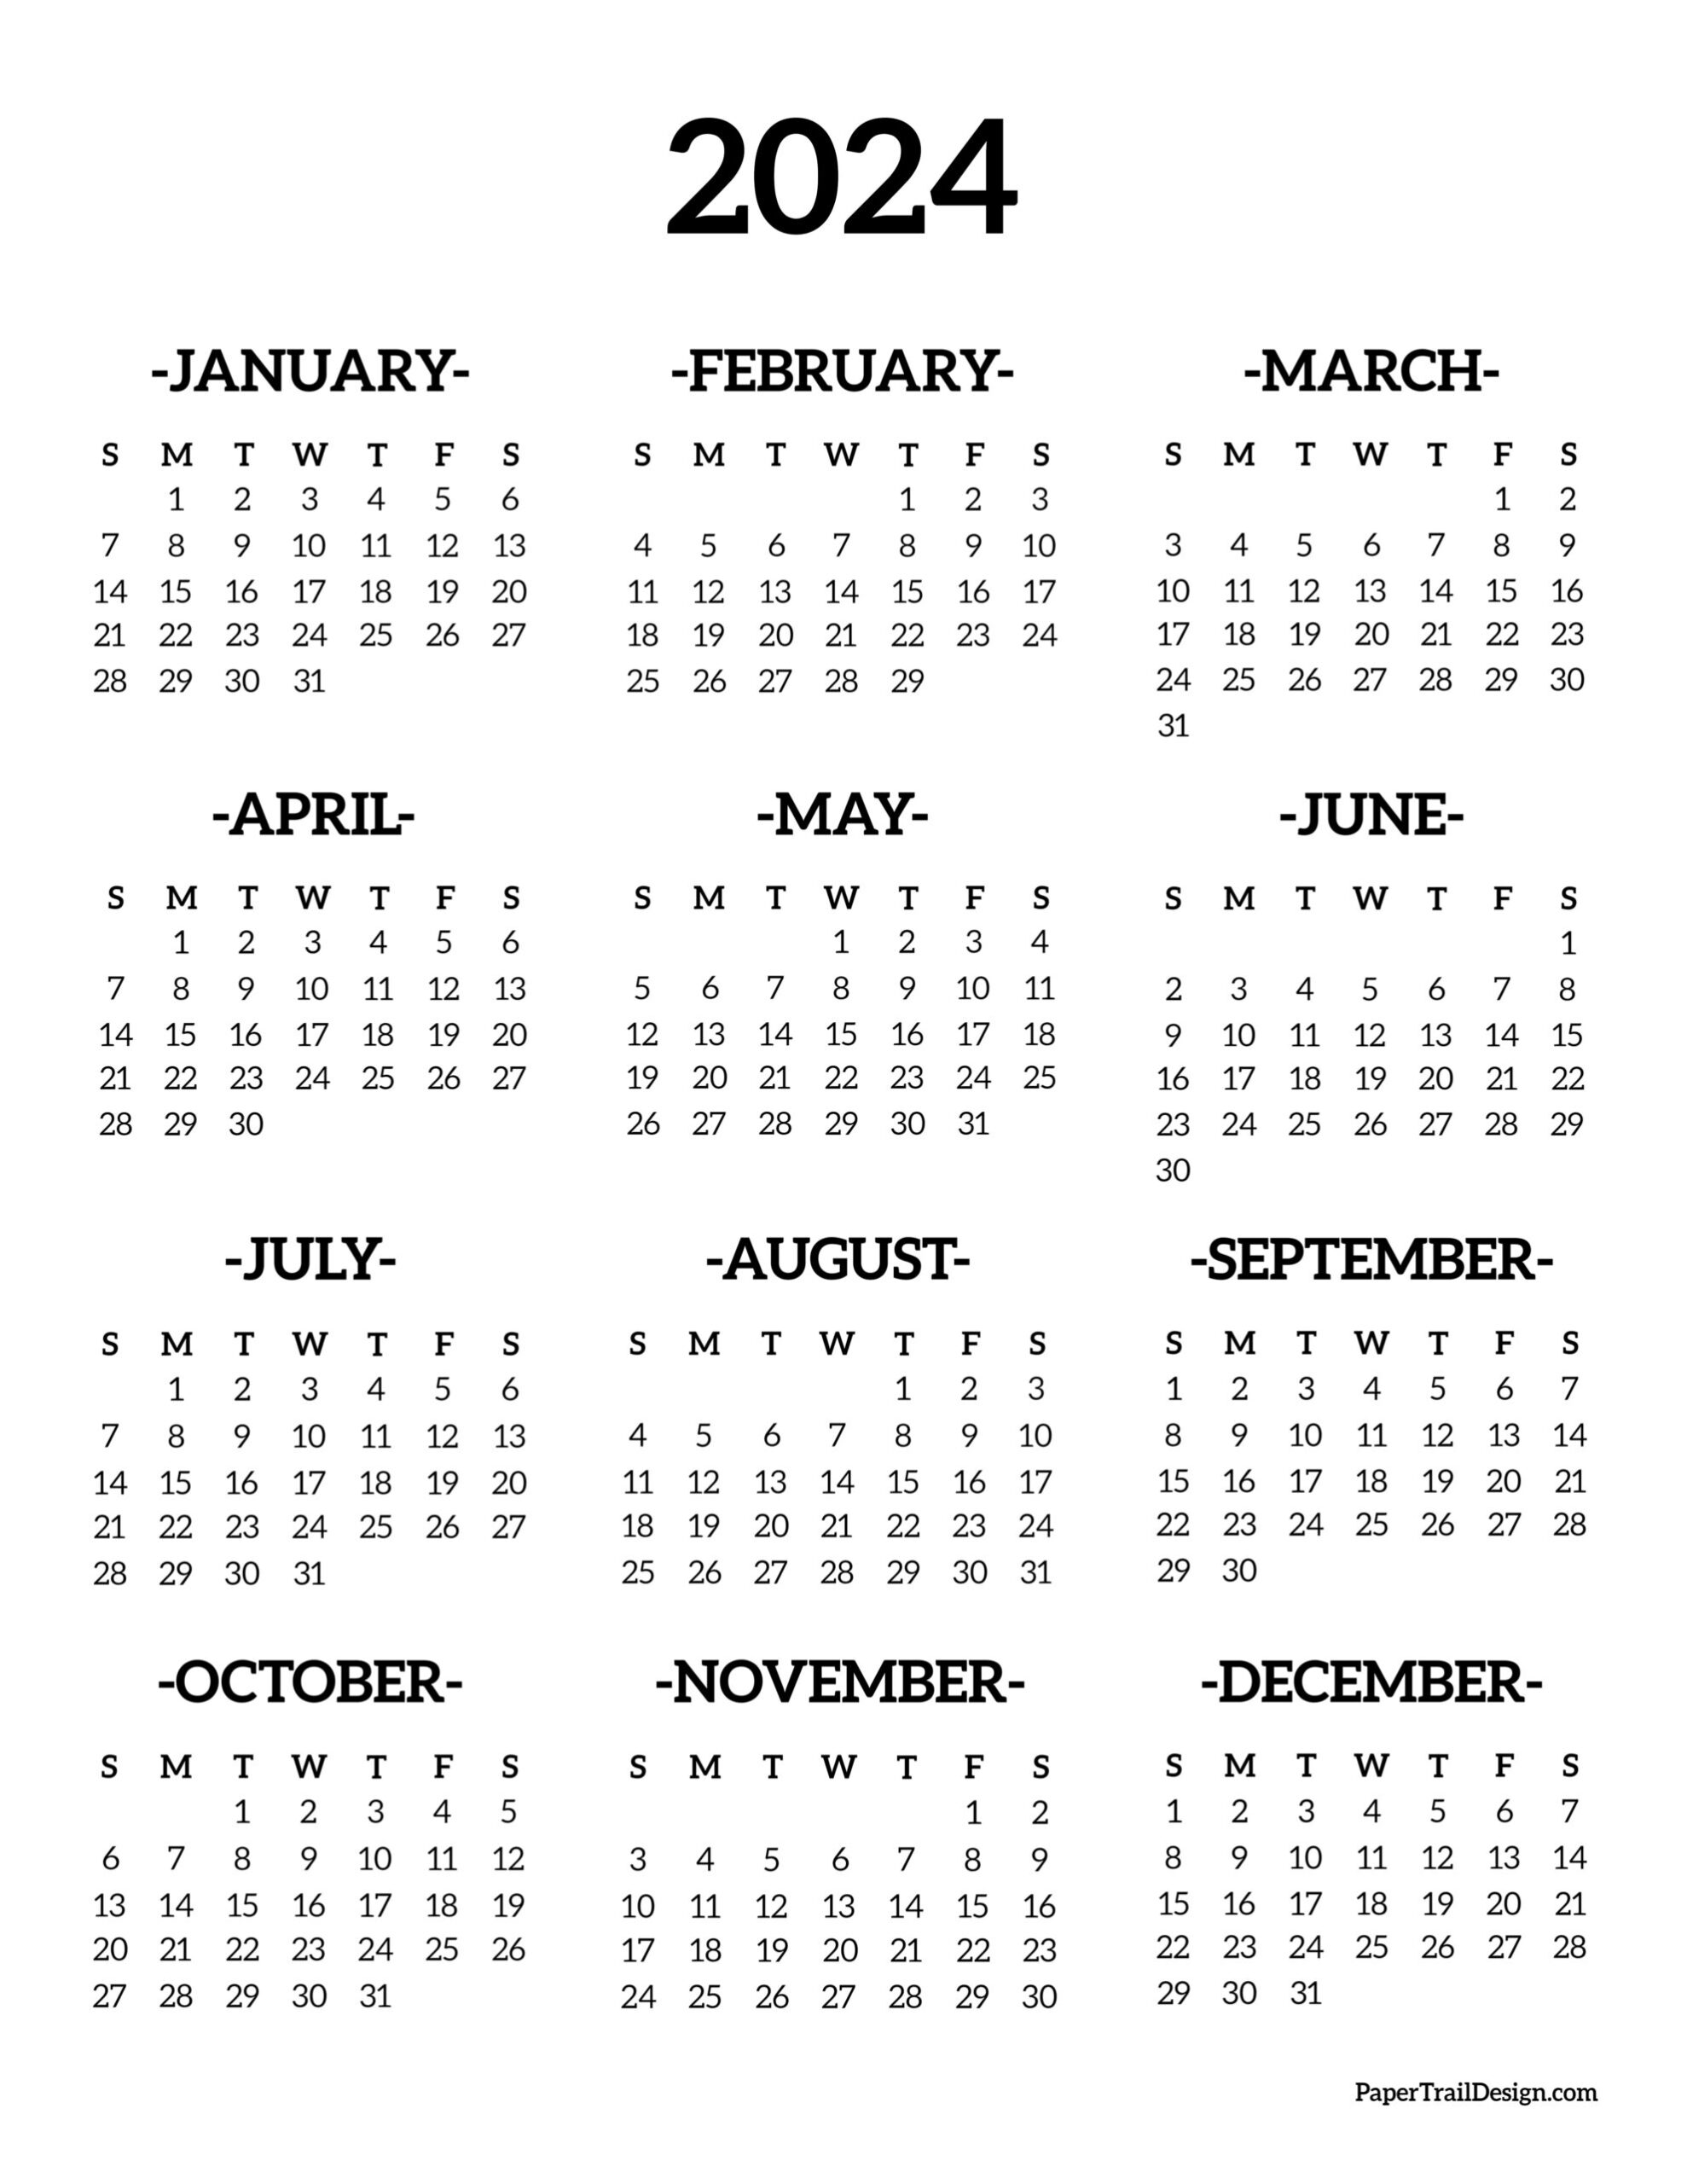 Calendar 2024 Printable One Page - Paper Trail Design for Yearly Calendar Printable 2024